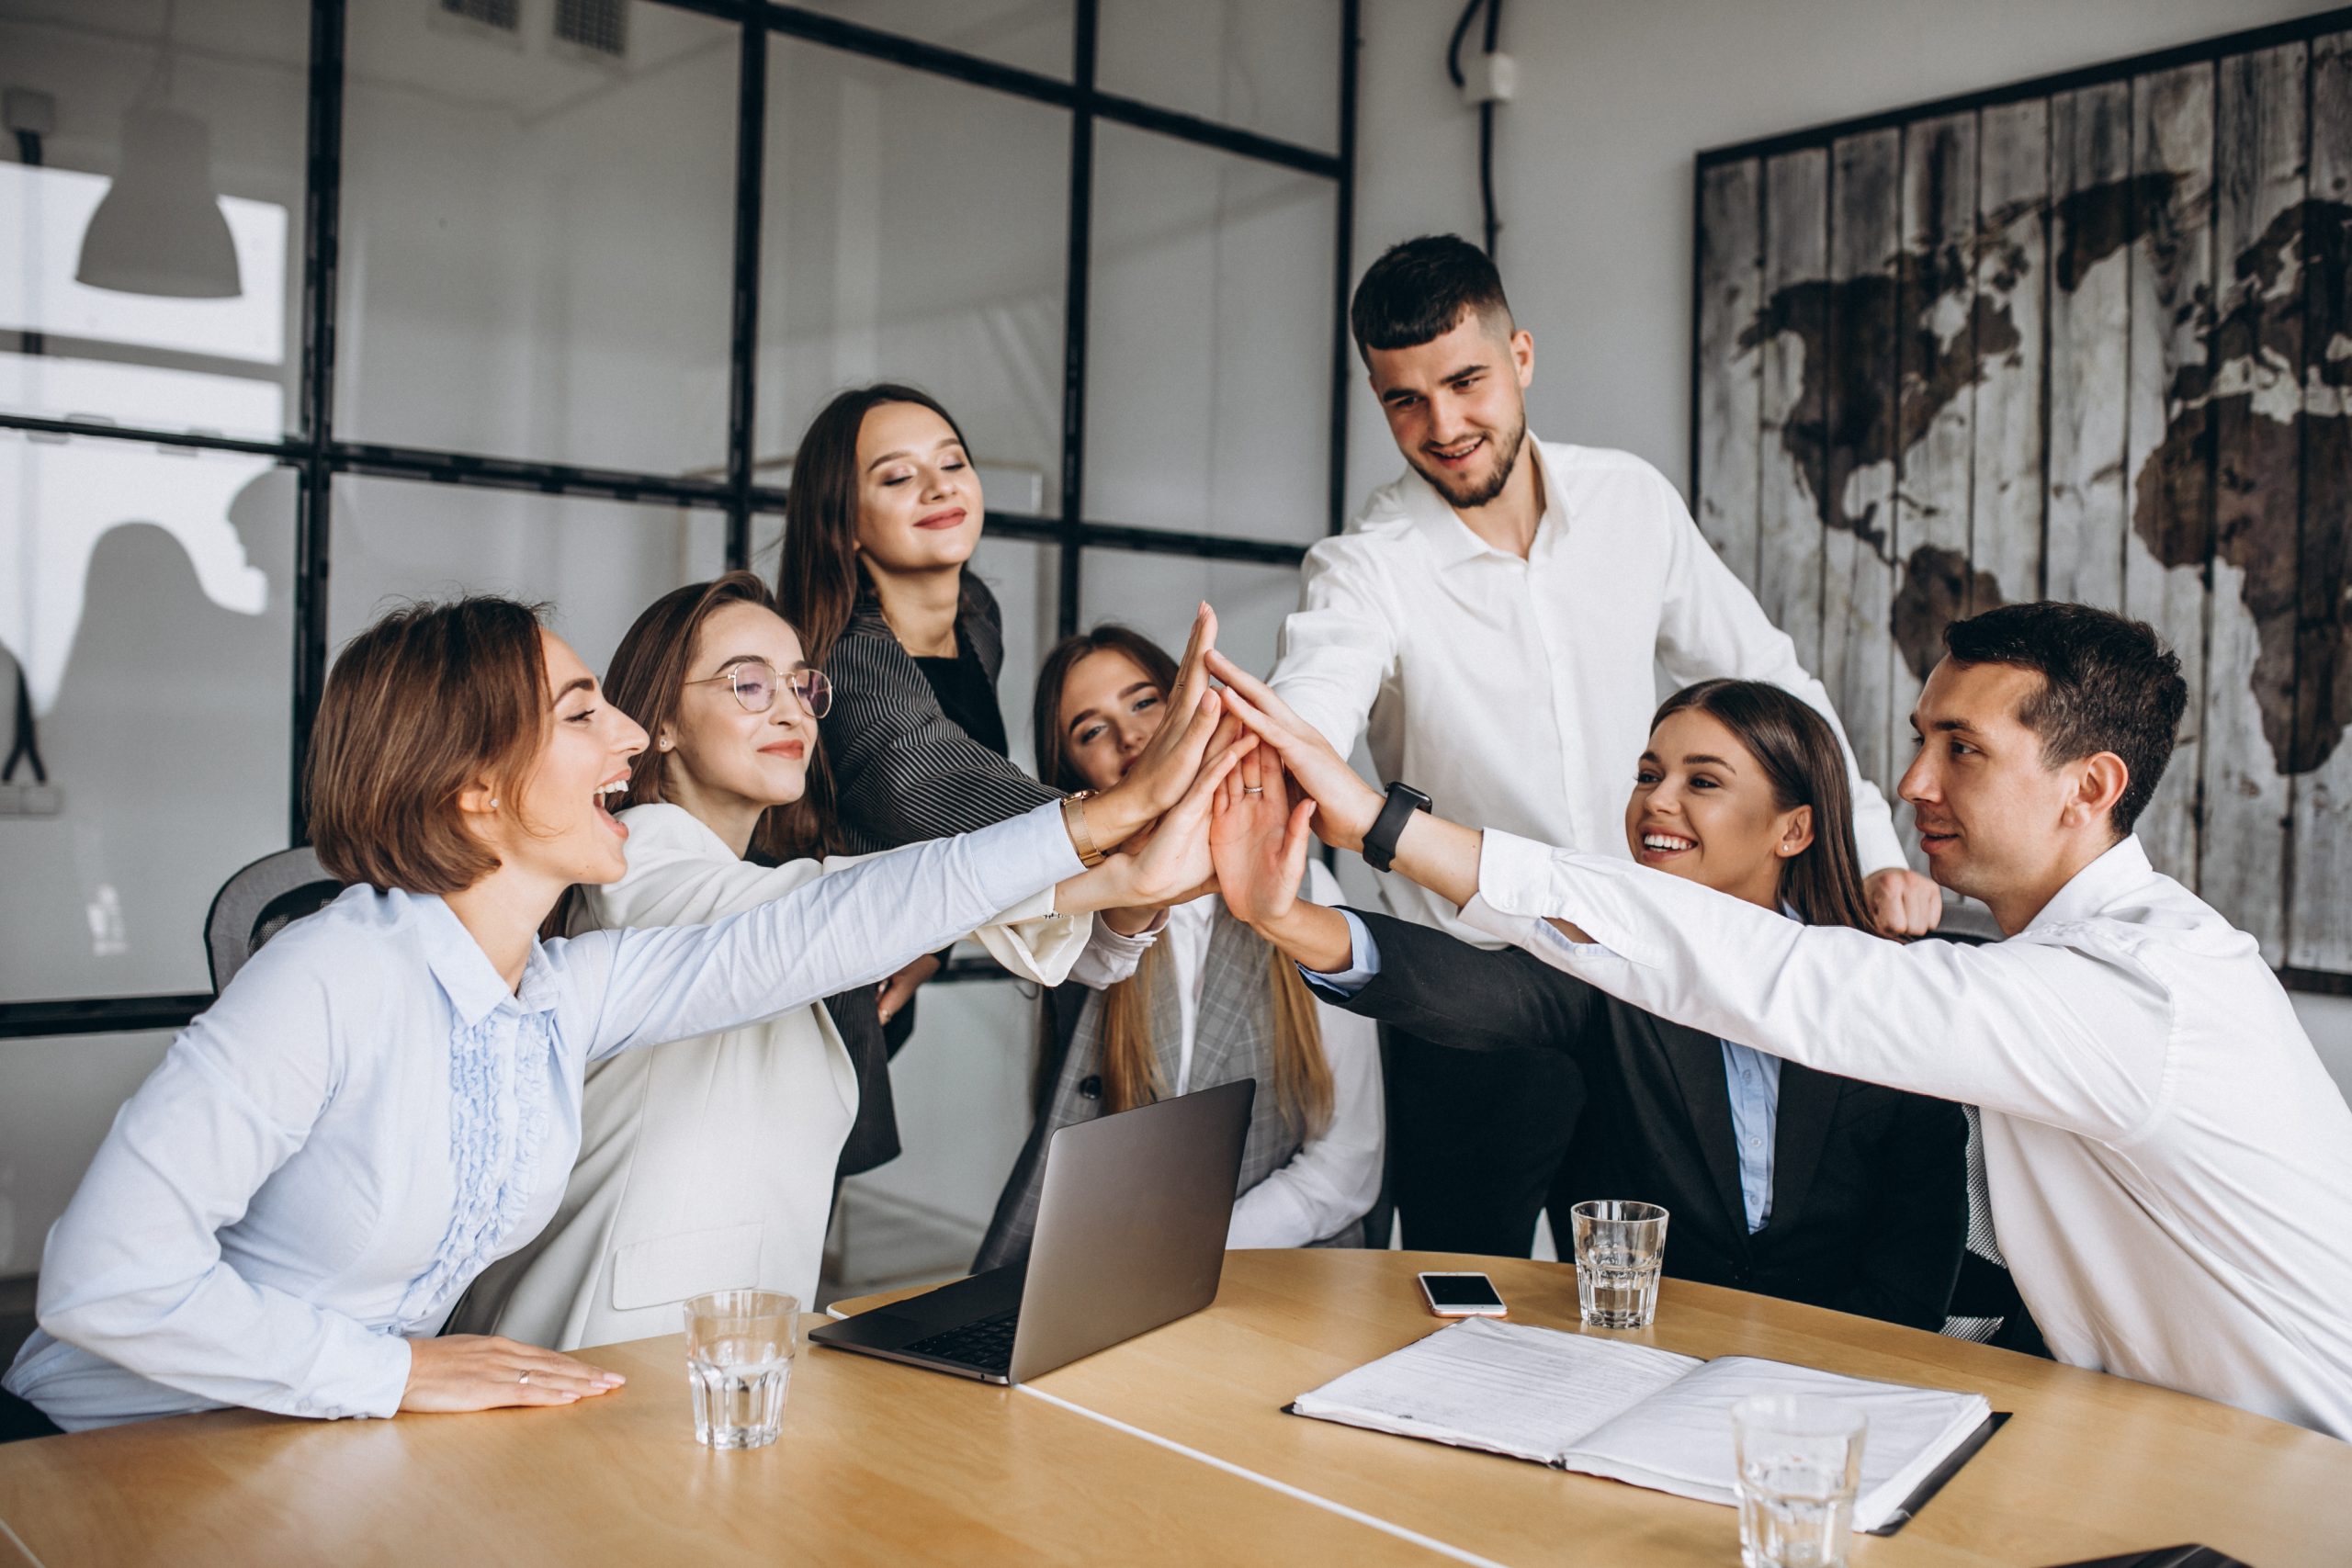 Team of employees high fiving each other in office